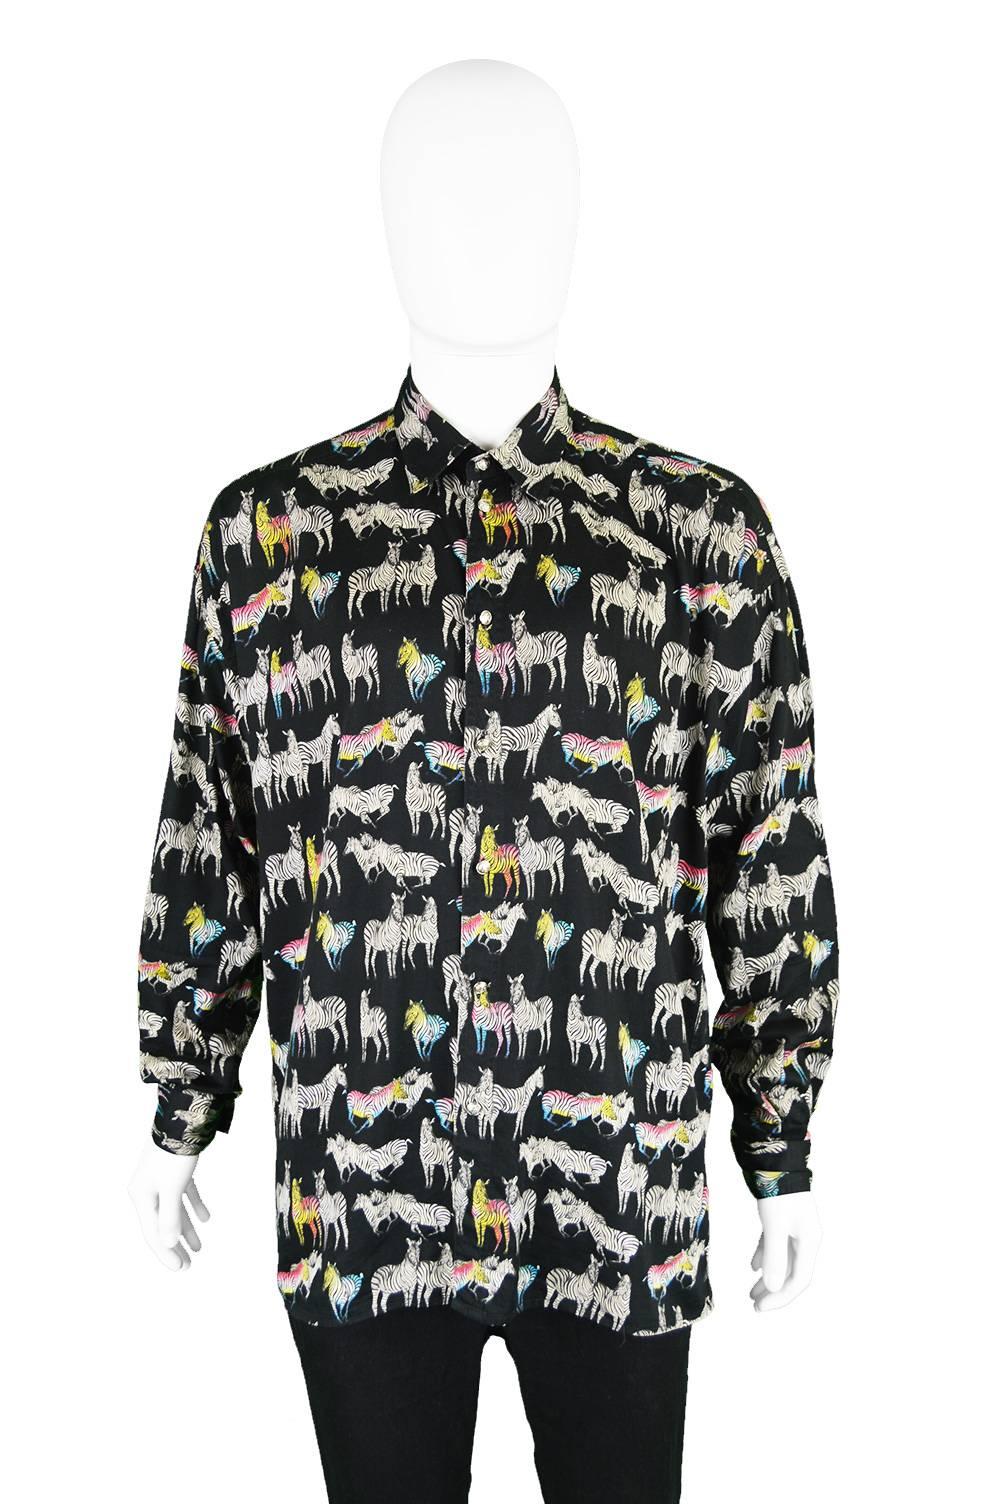 A fun and stylish vintage mens Versace Jeans Couture shirt from the 1990s with an unusual zebra print - roughly one in three of these zebras are rainbow coloured, standing out from the rest of the herd, just as you would in this vibrantly printed